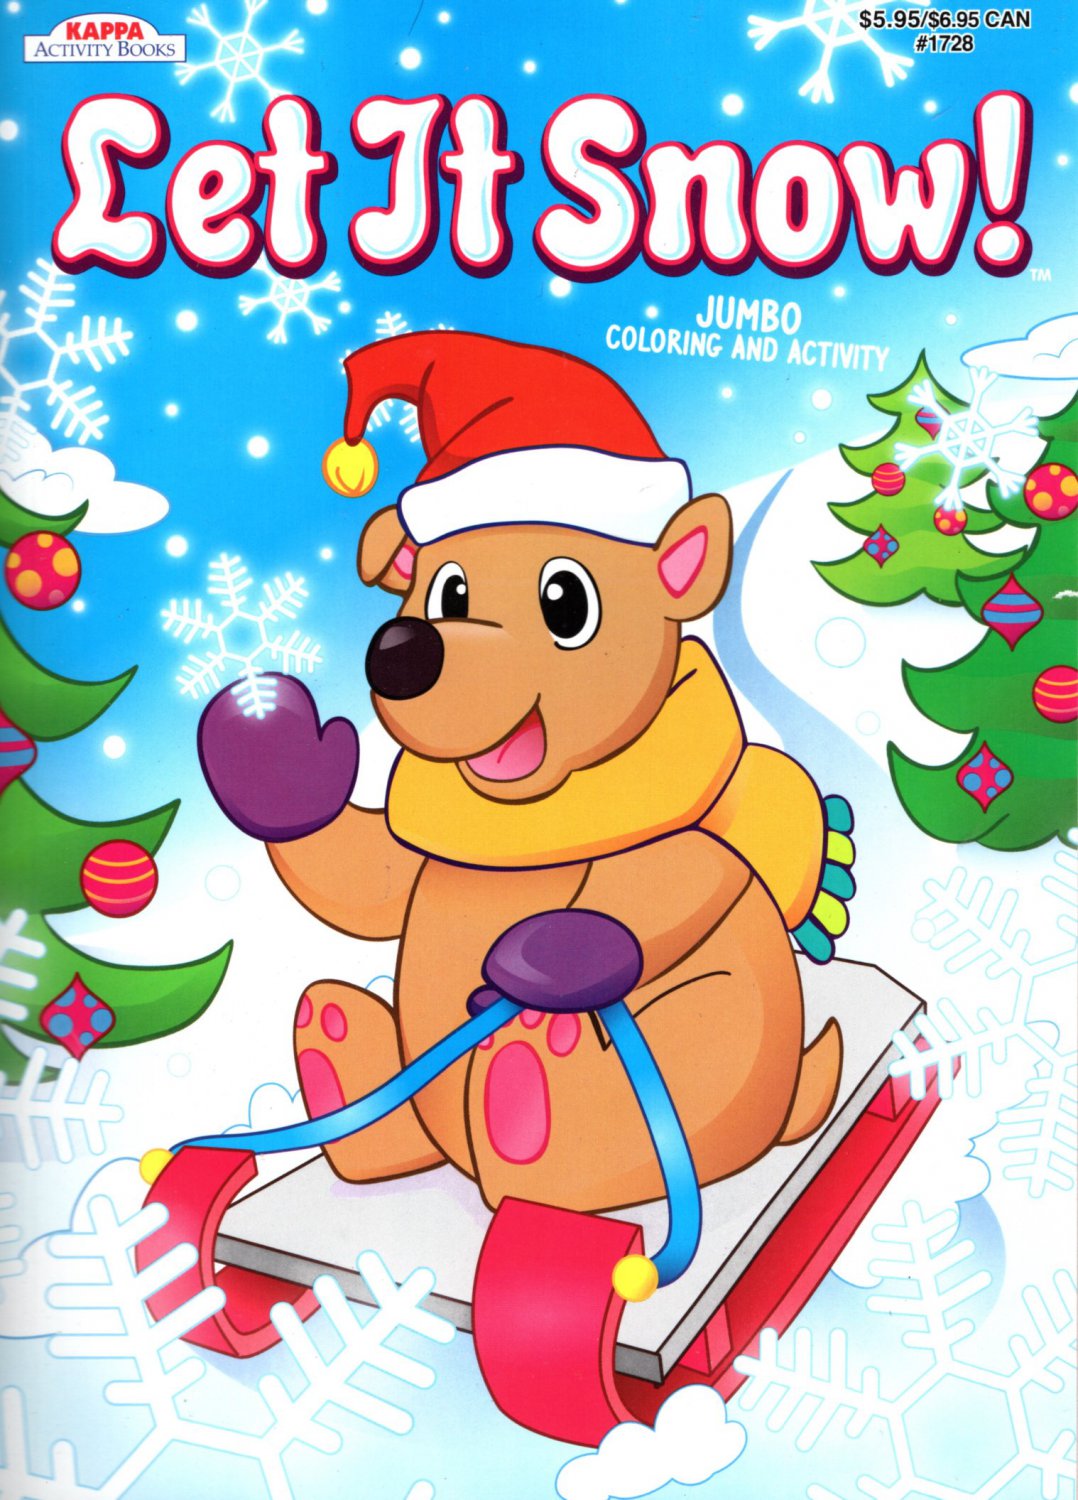 Christmas Edition Holiday - Jumbo Coloring and Activity Book - Let it Snow